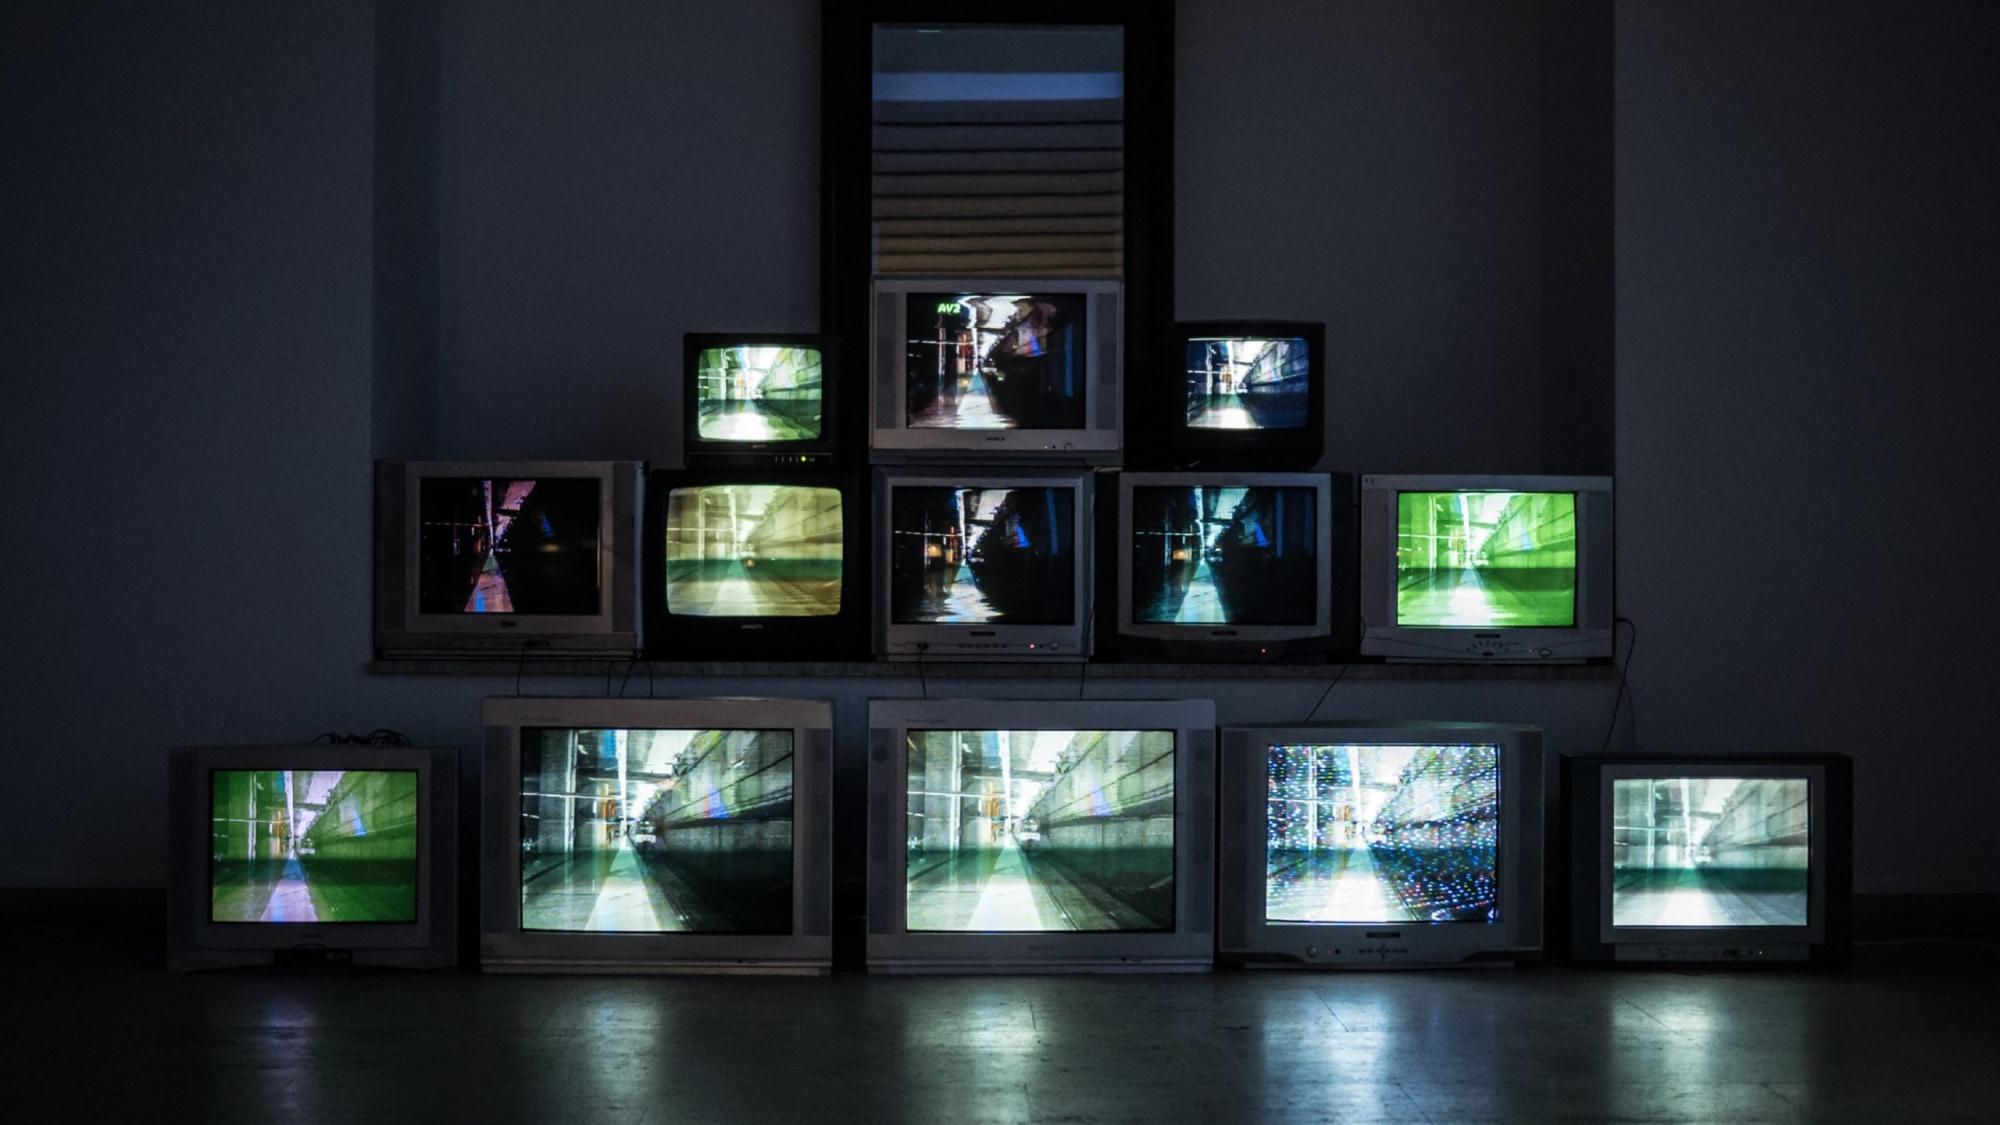 Television screens in a dark room